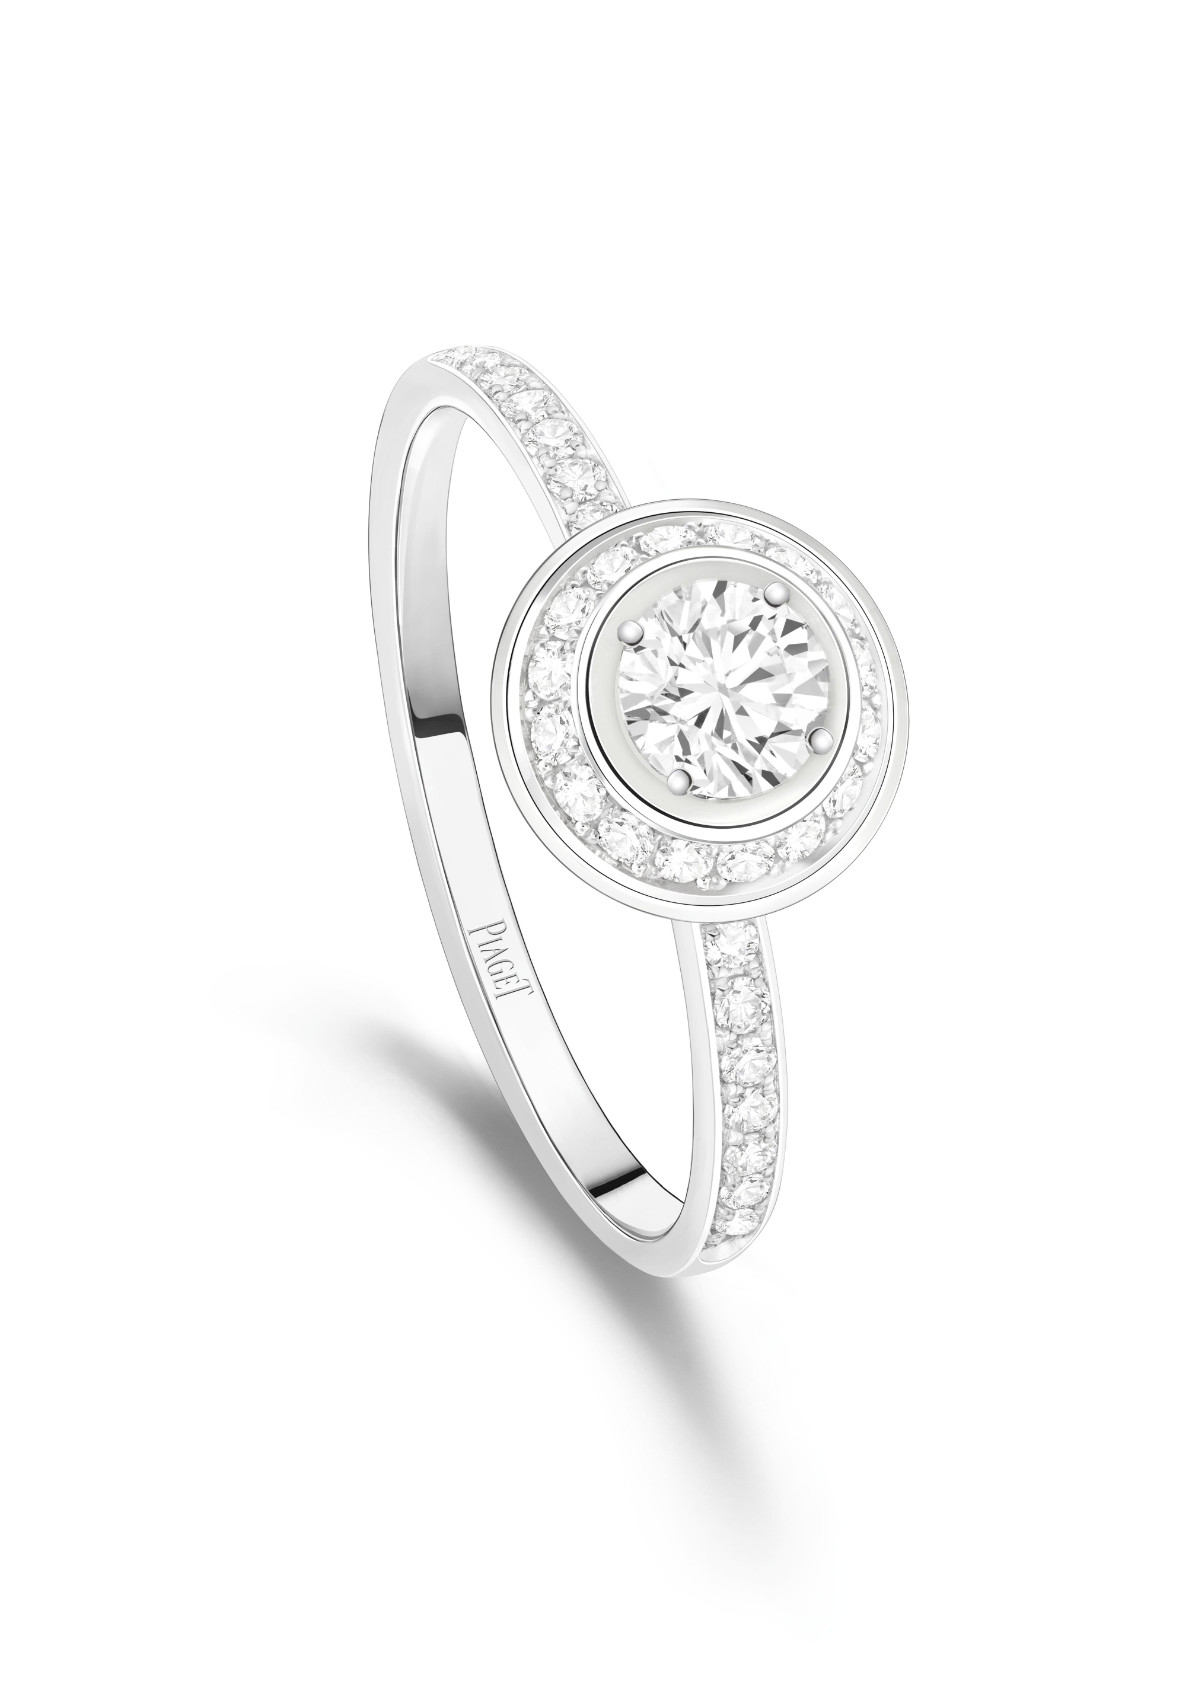 Say Yes: The Piaget Possession Platinum Ring